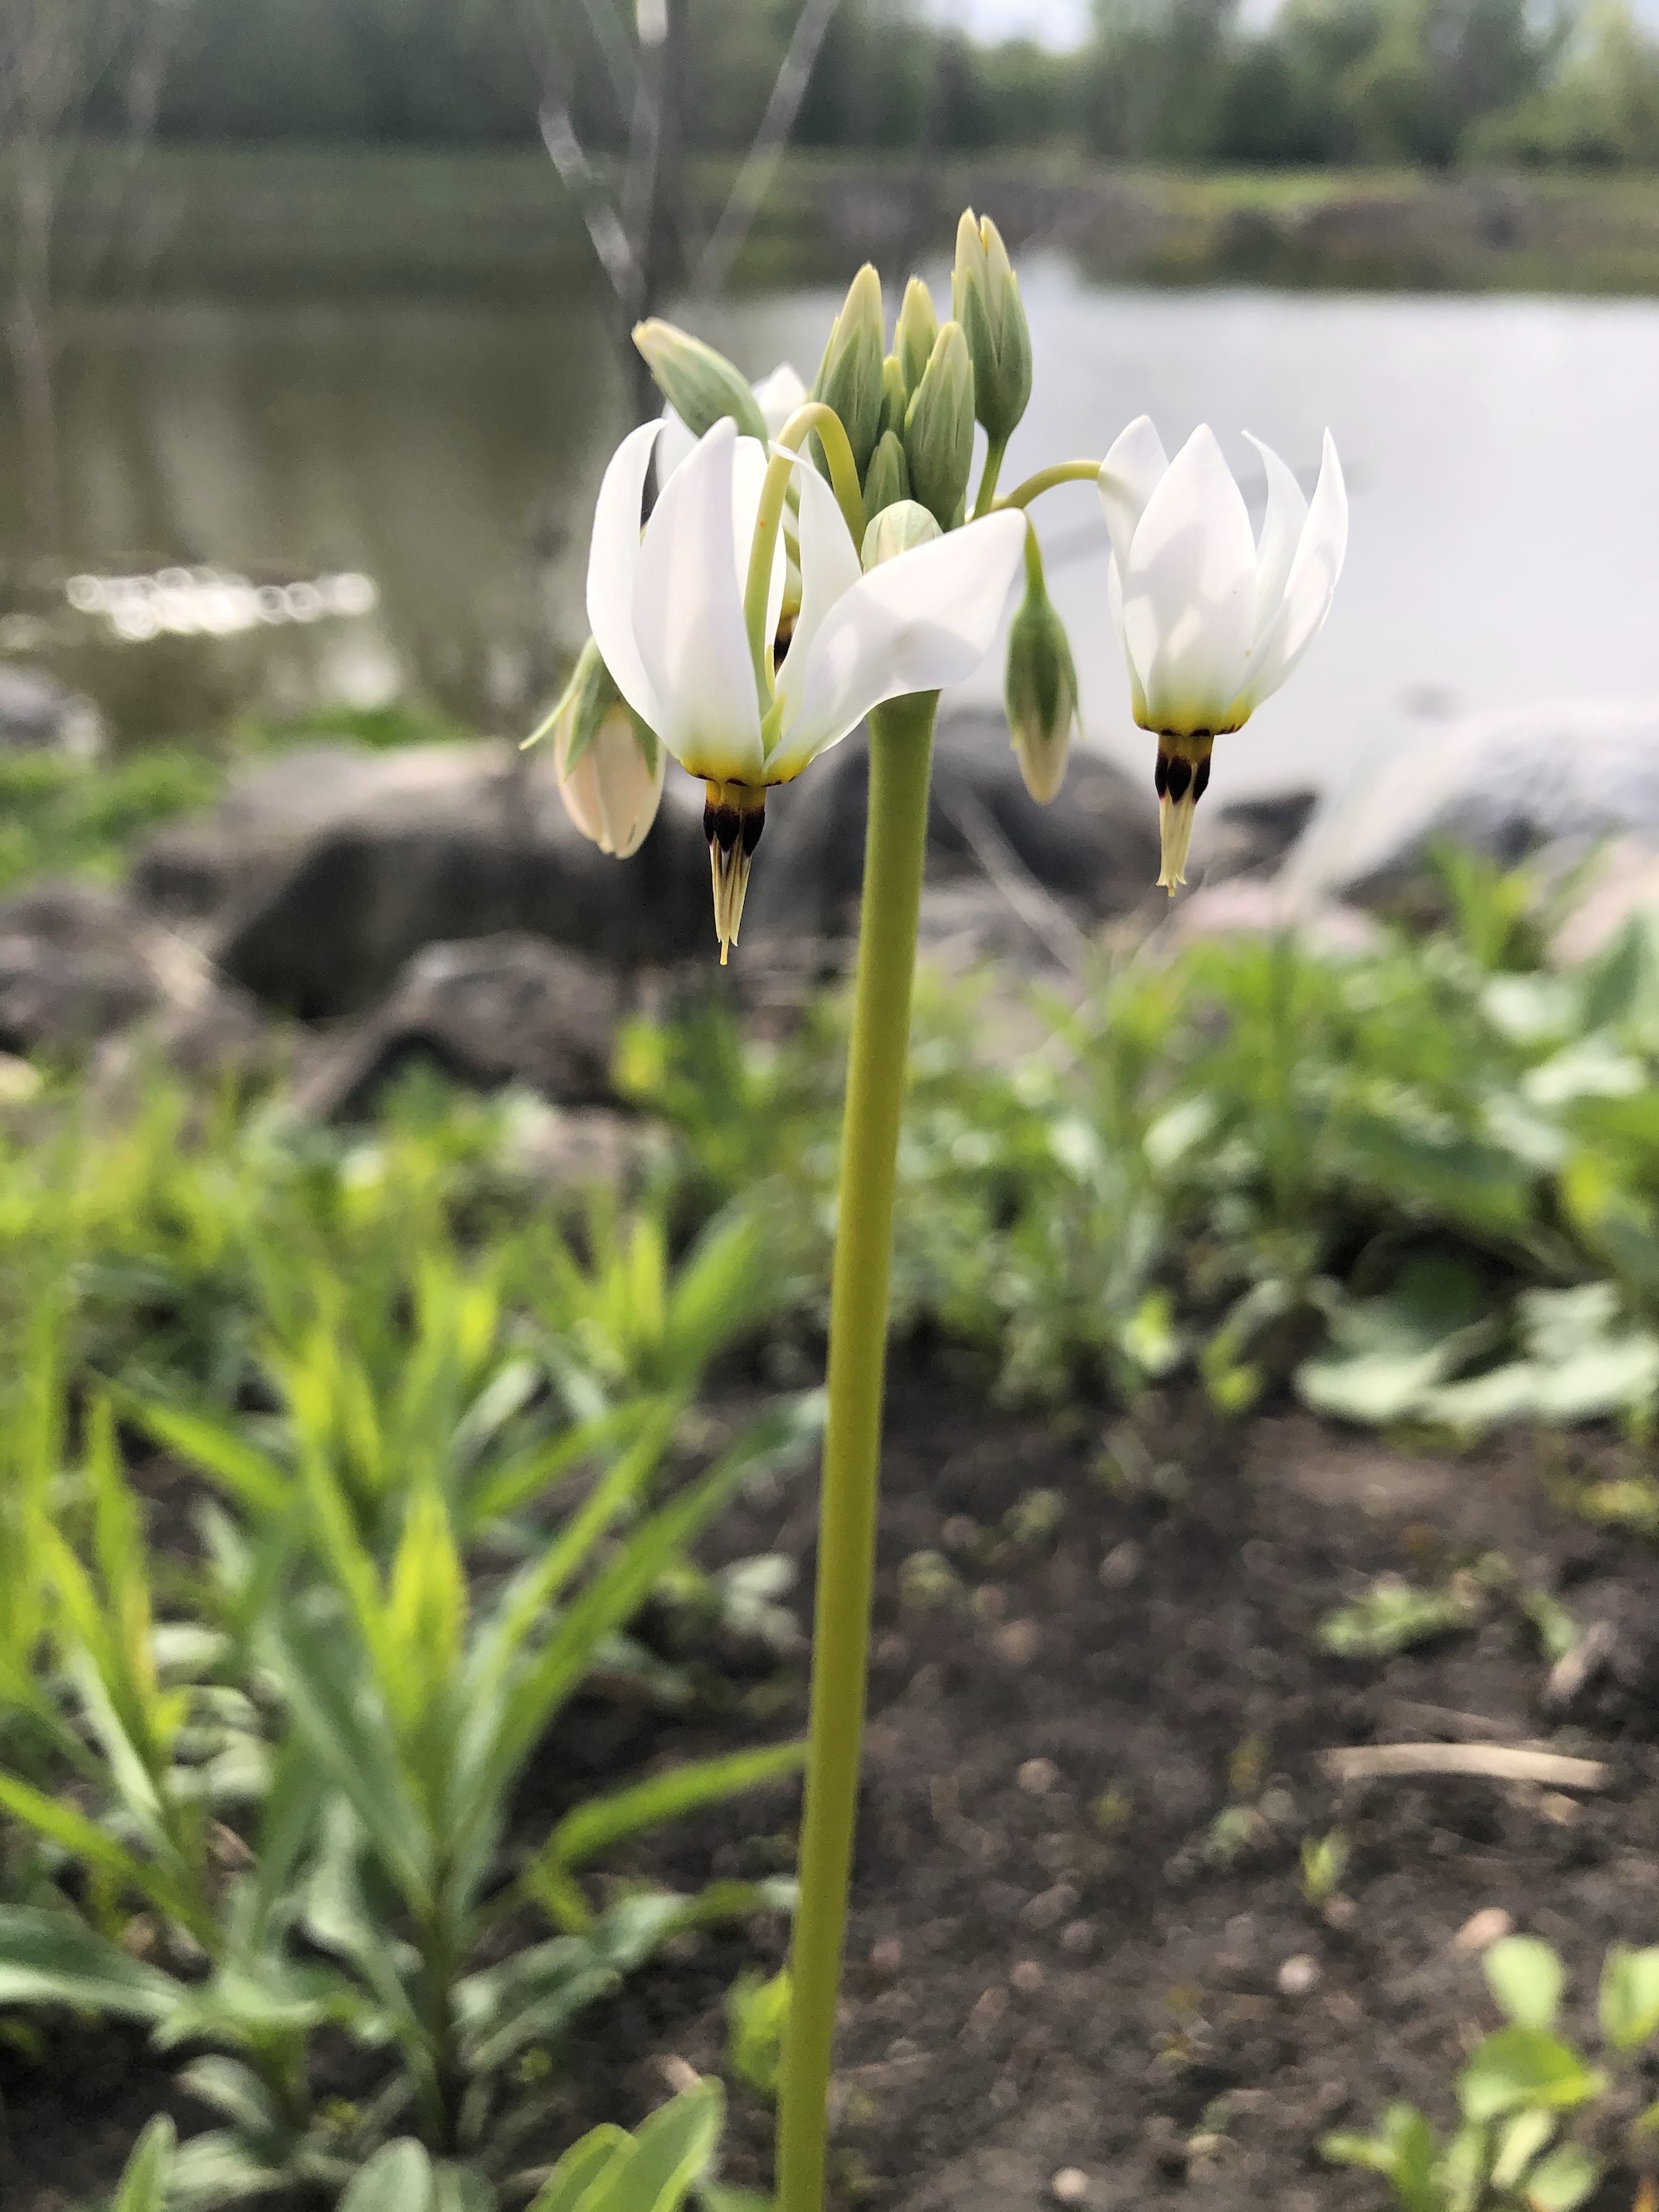 Shooting Star on bank of retaining pond on May 9, 2021.